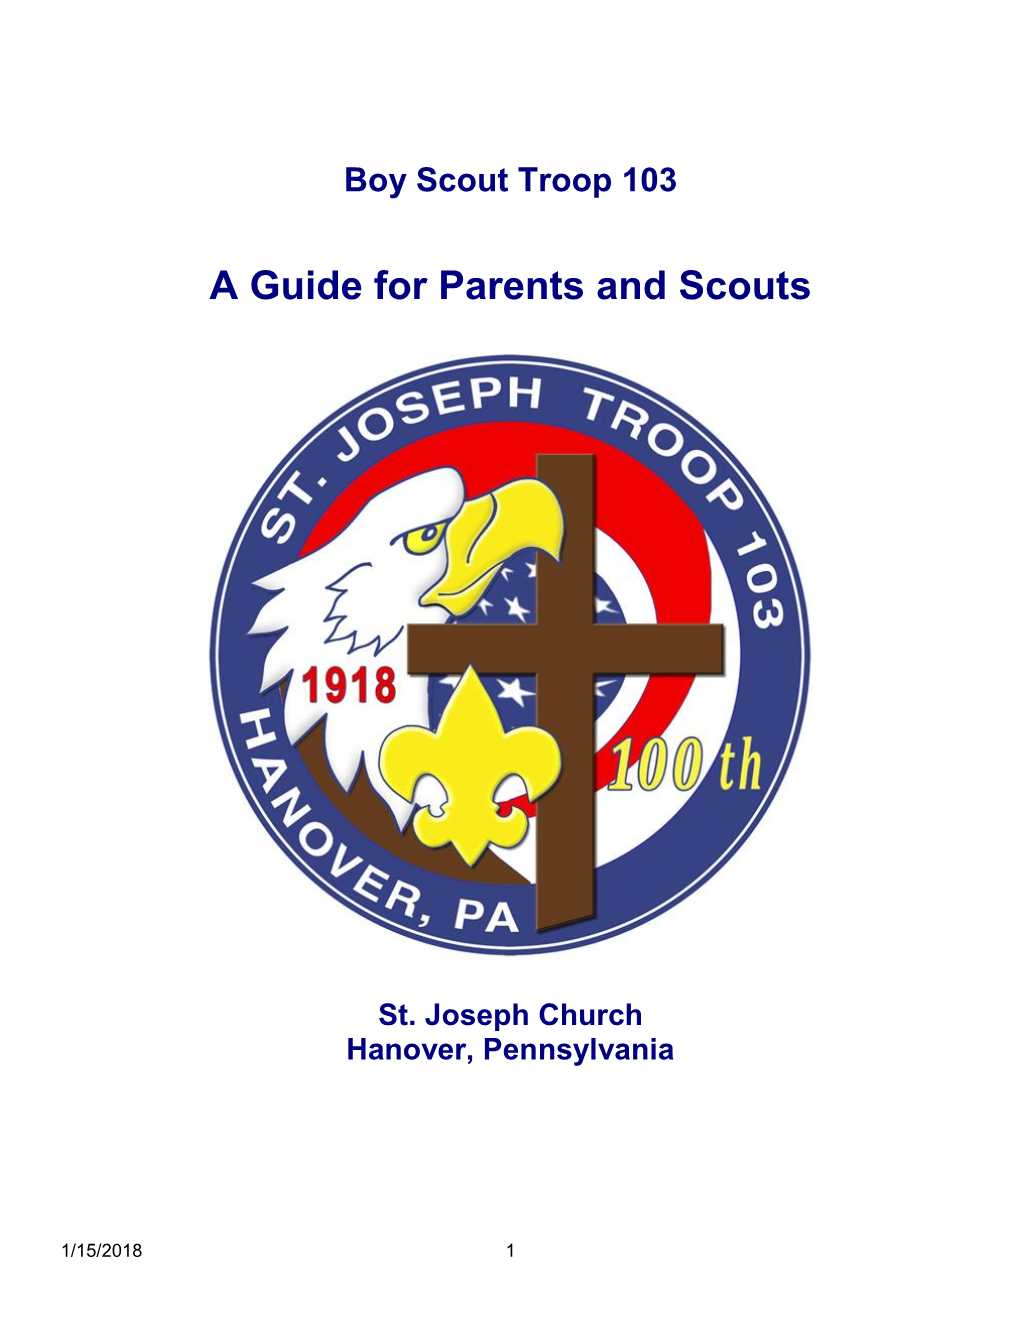 Troop Guide for Parents and Scouts